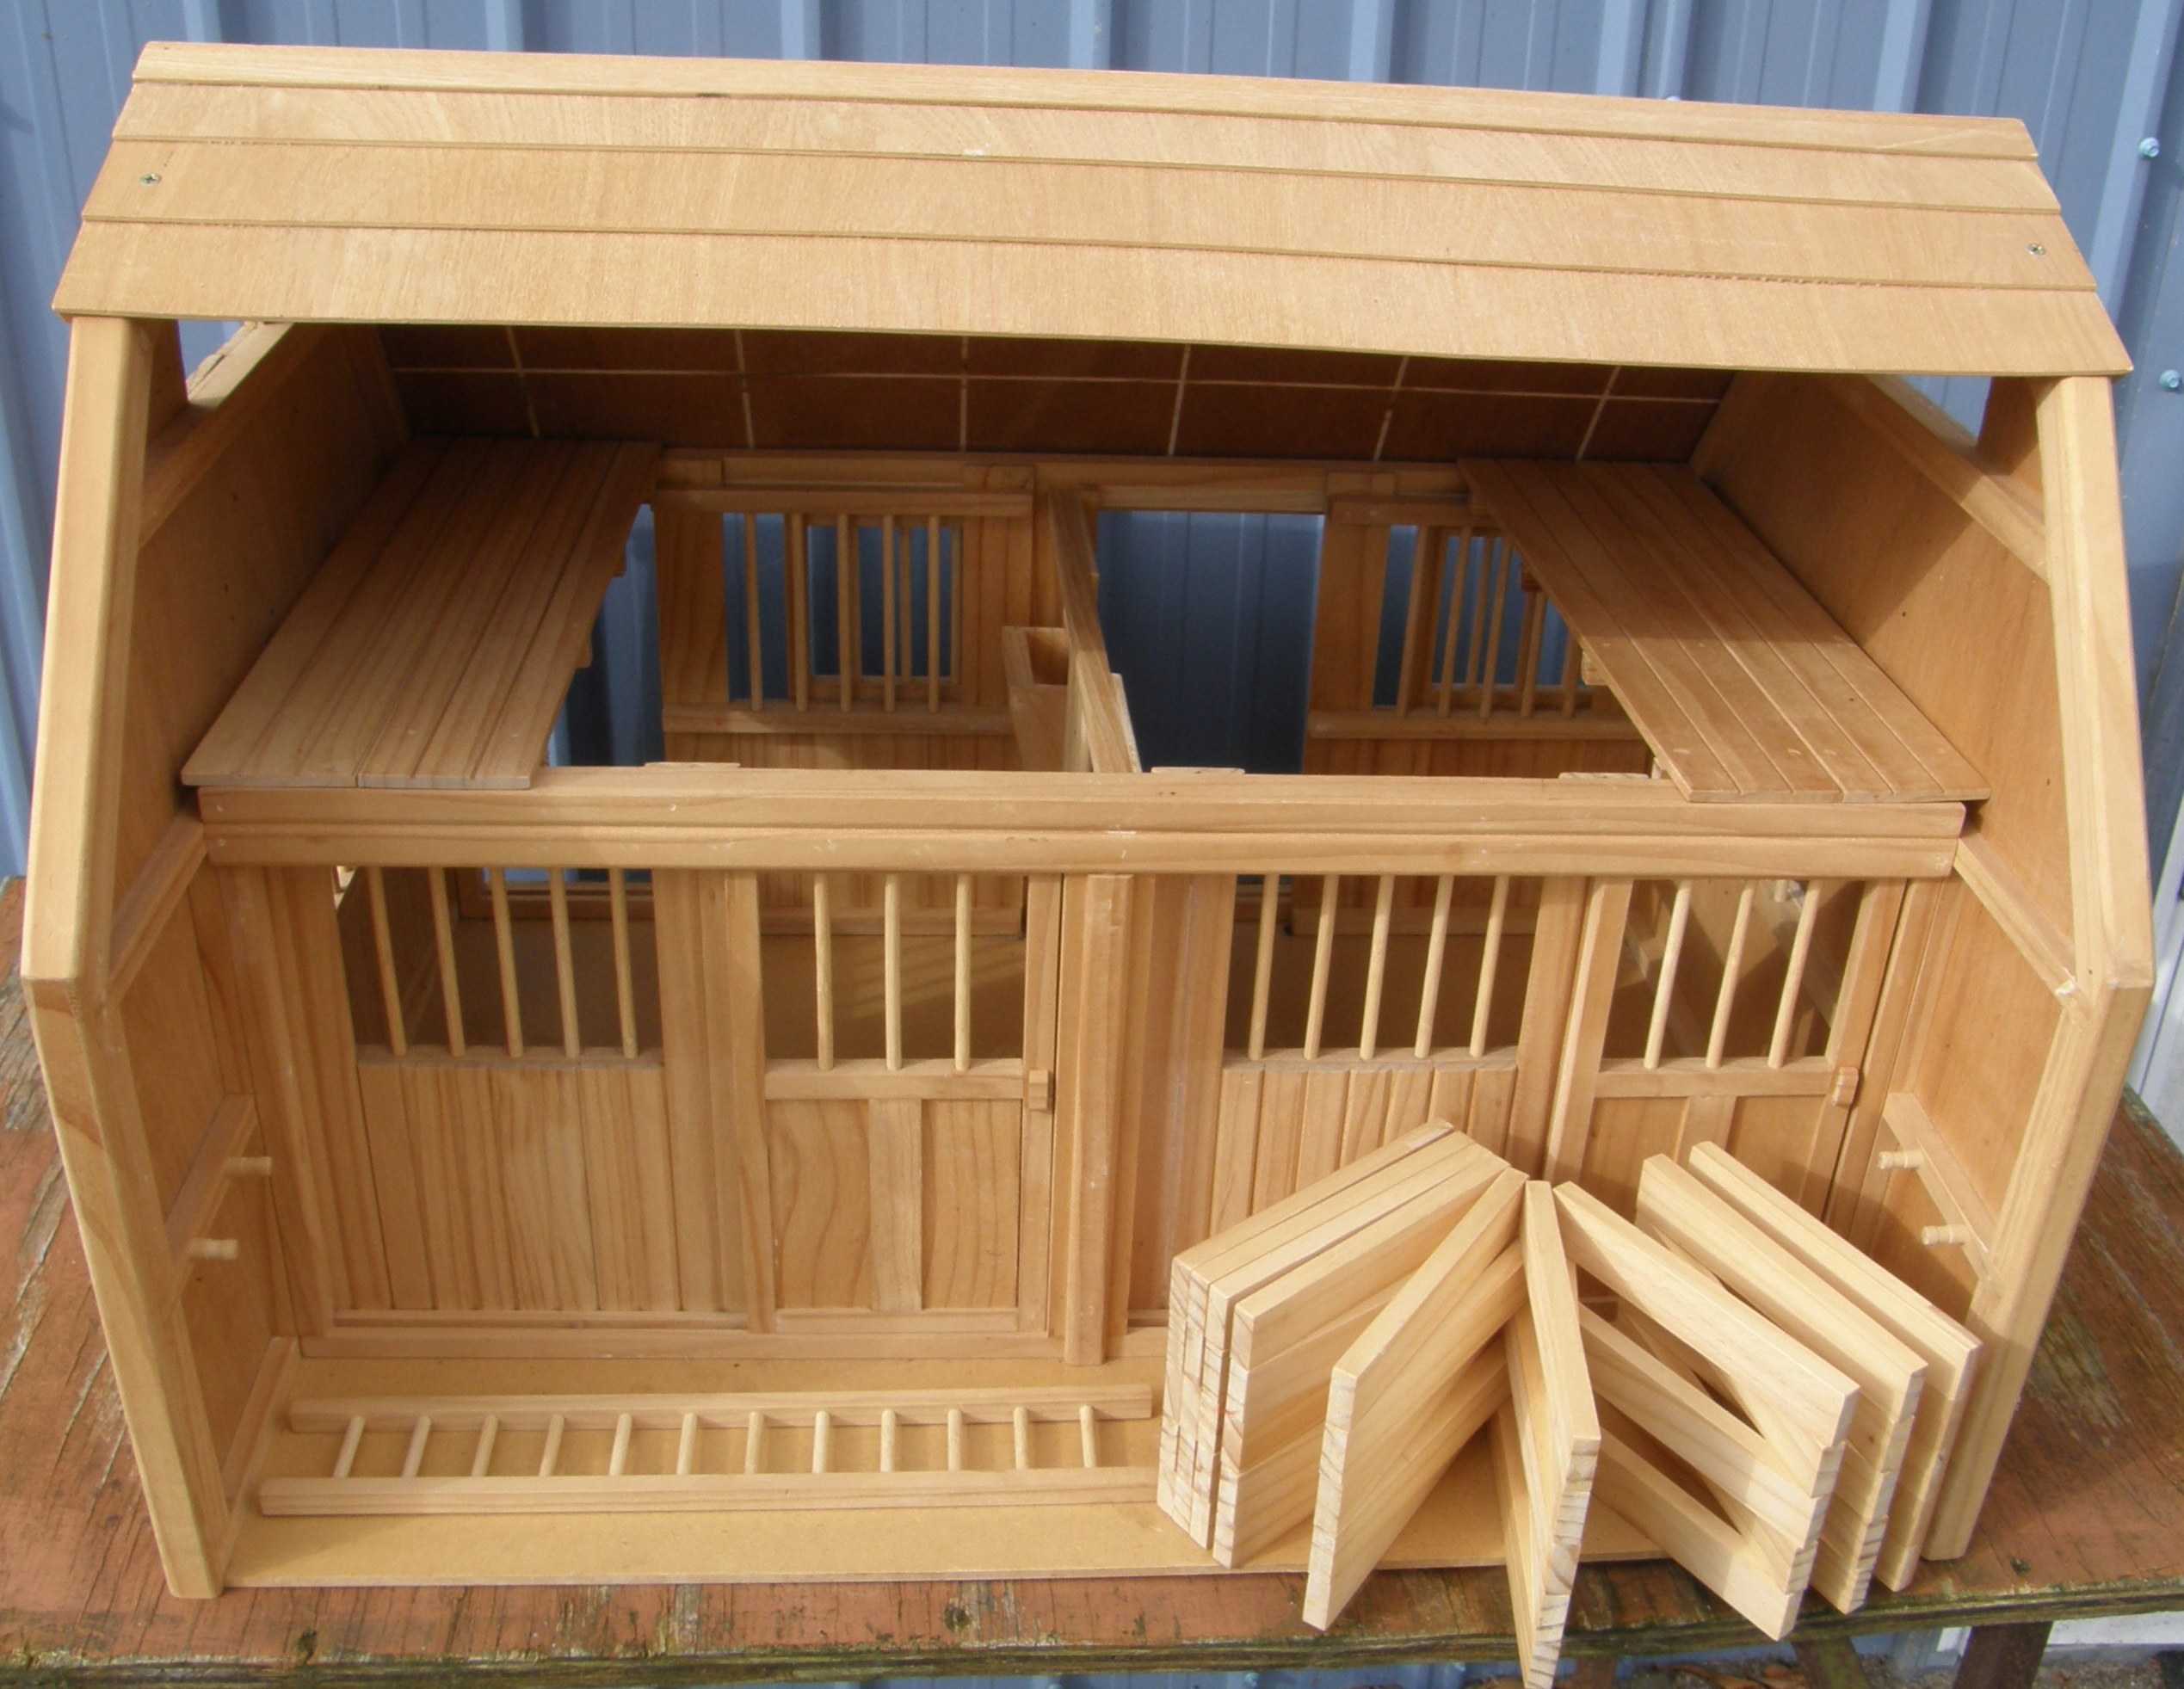 wooden-toy-barn-building-plans-free-woodworking-plans-toy-barn-building-materials-innovations